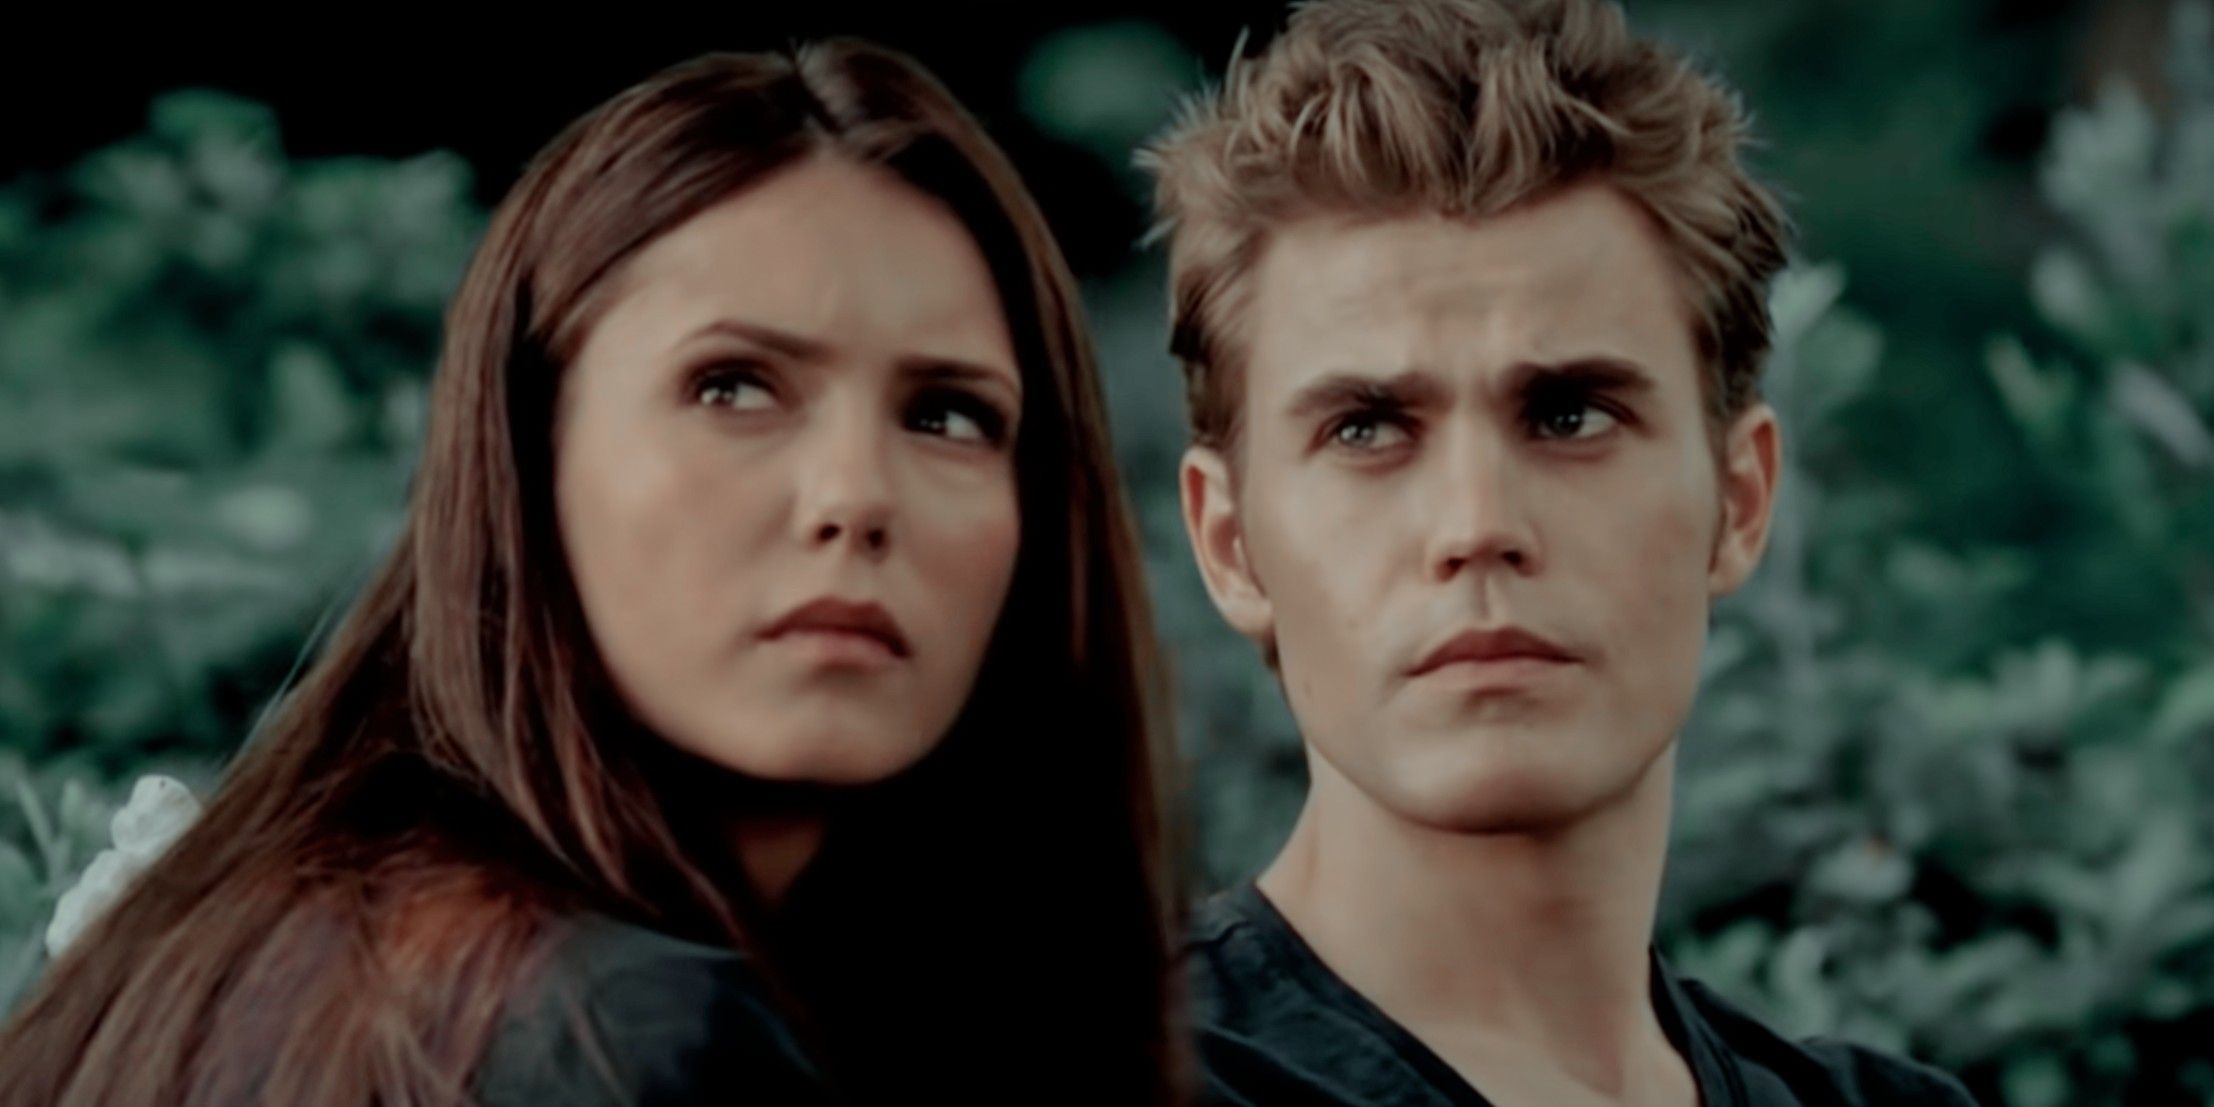 Elena and Stefan look up annoyed in The Vampire Diaries